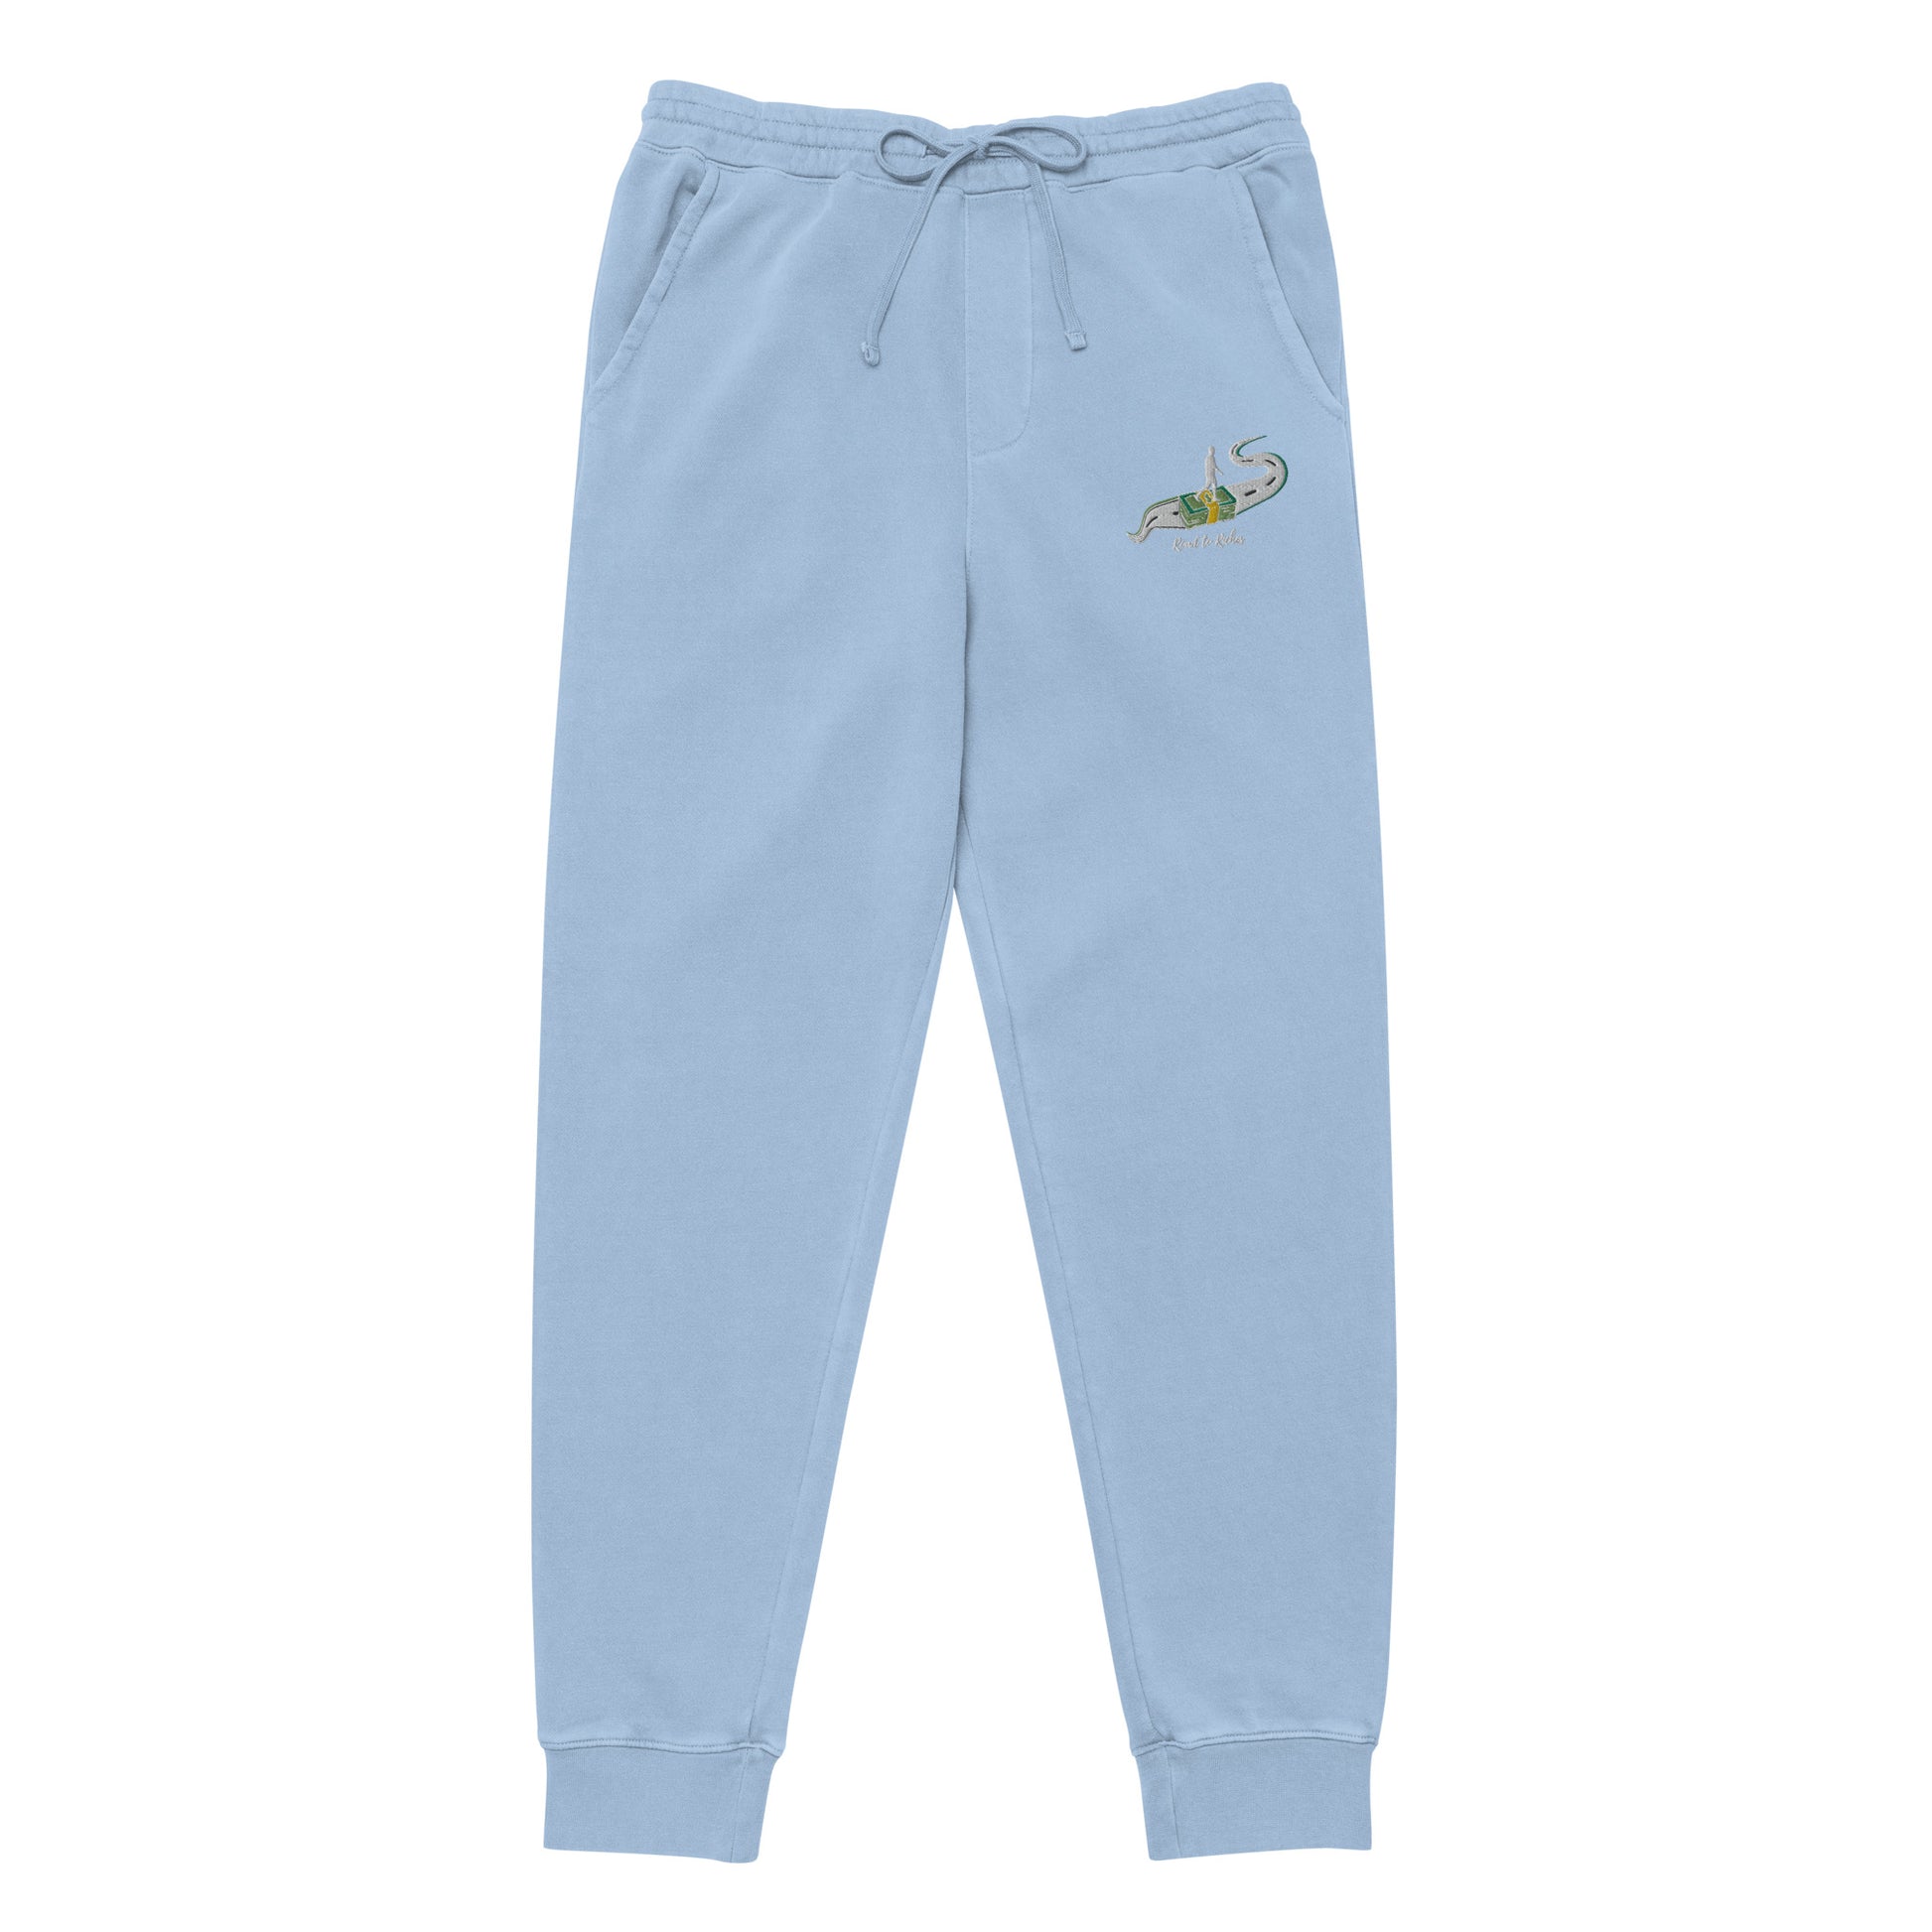 Road to Riches Unisex Sweatpants - Pigment Dyed - Conscious tees inc.